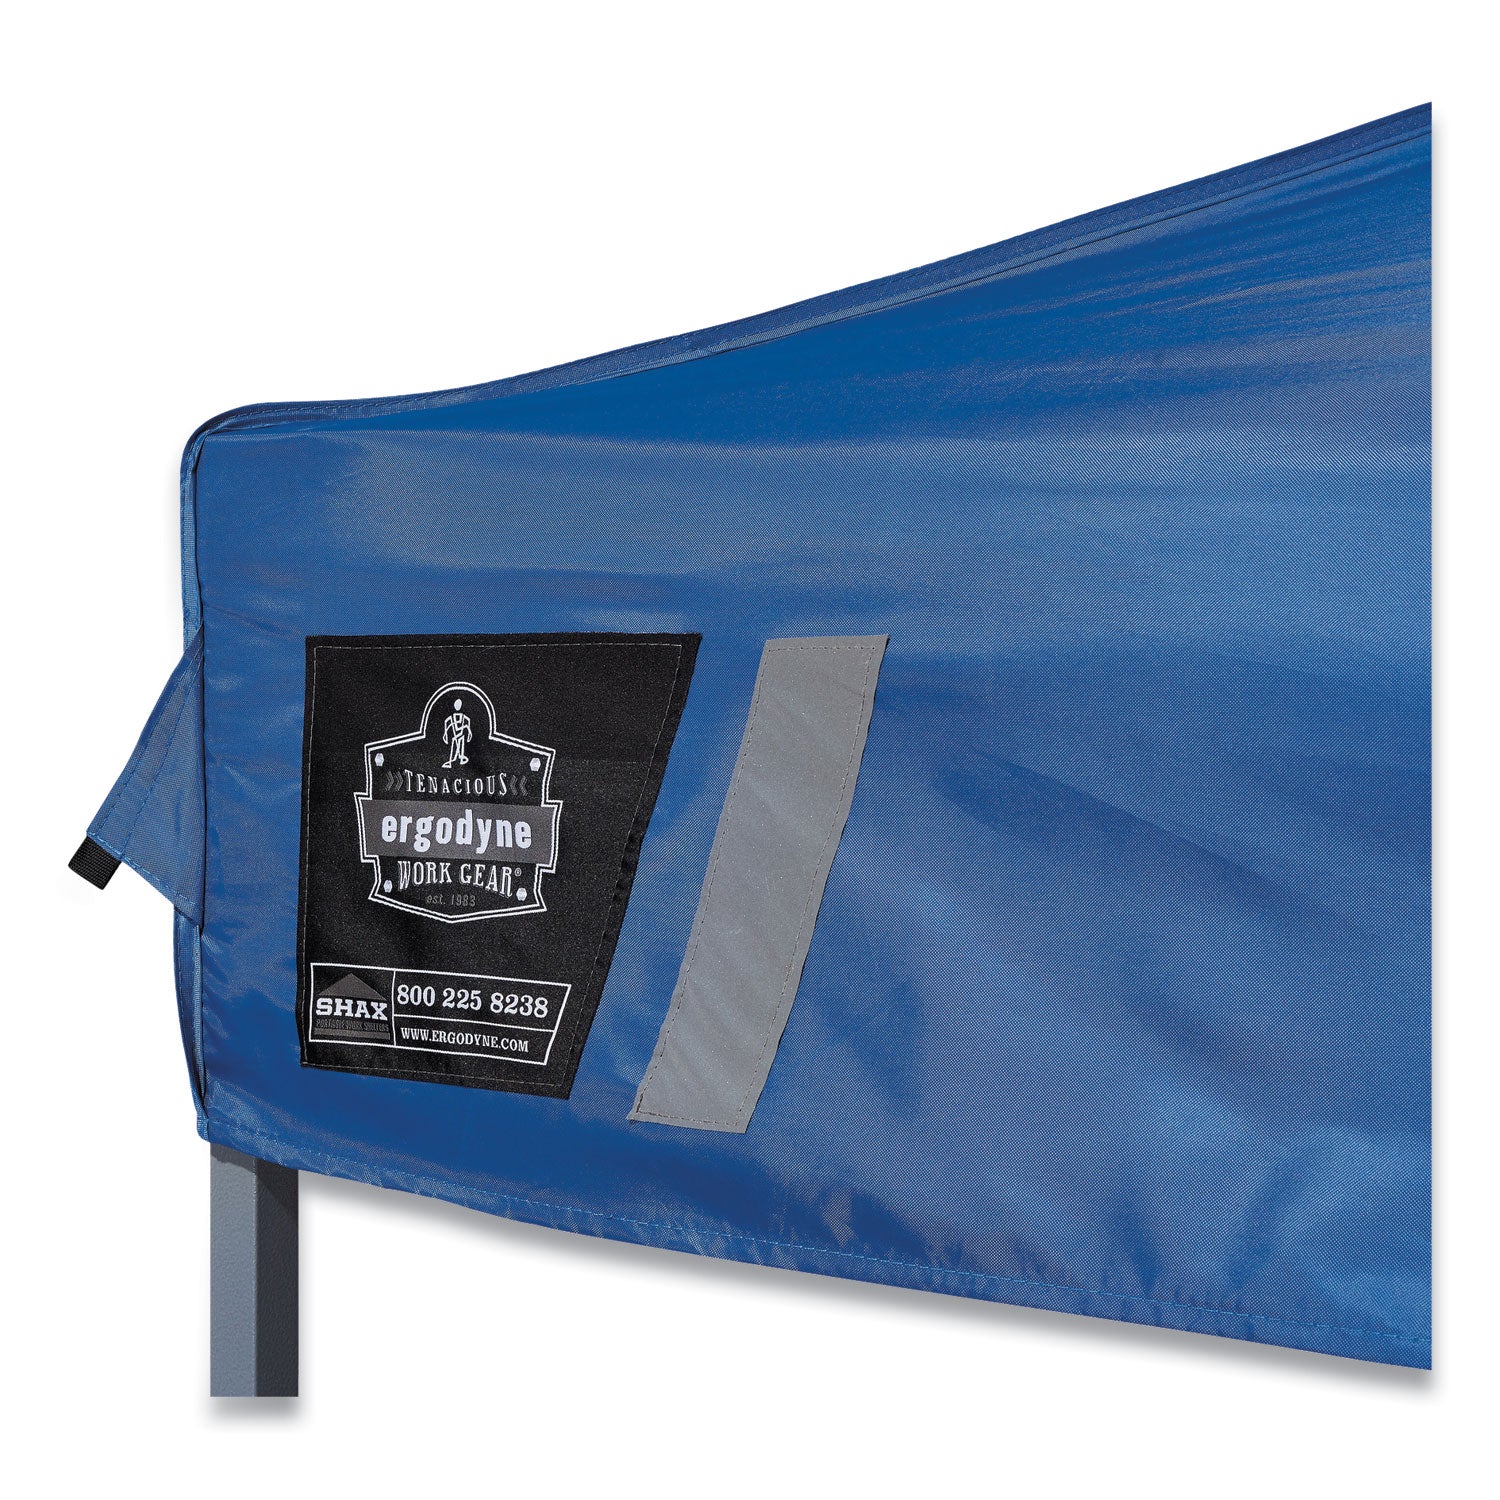 shax-6000c-replacement-pop-up-tent-canopy-for-6000-10-ft-x-10-ft-polyester-blue-ships-in-1-3-business-days_ego12941 - 4